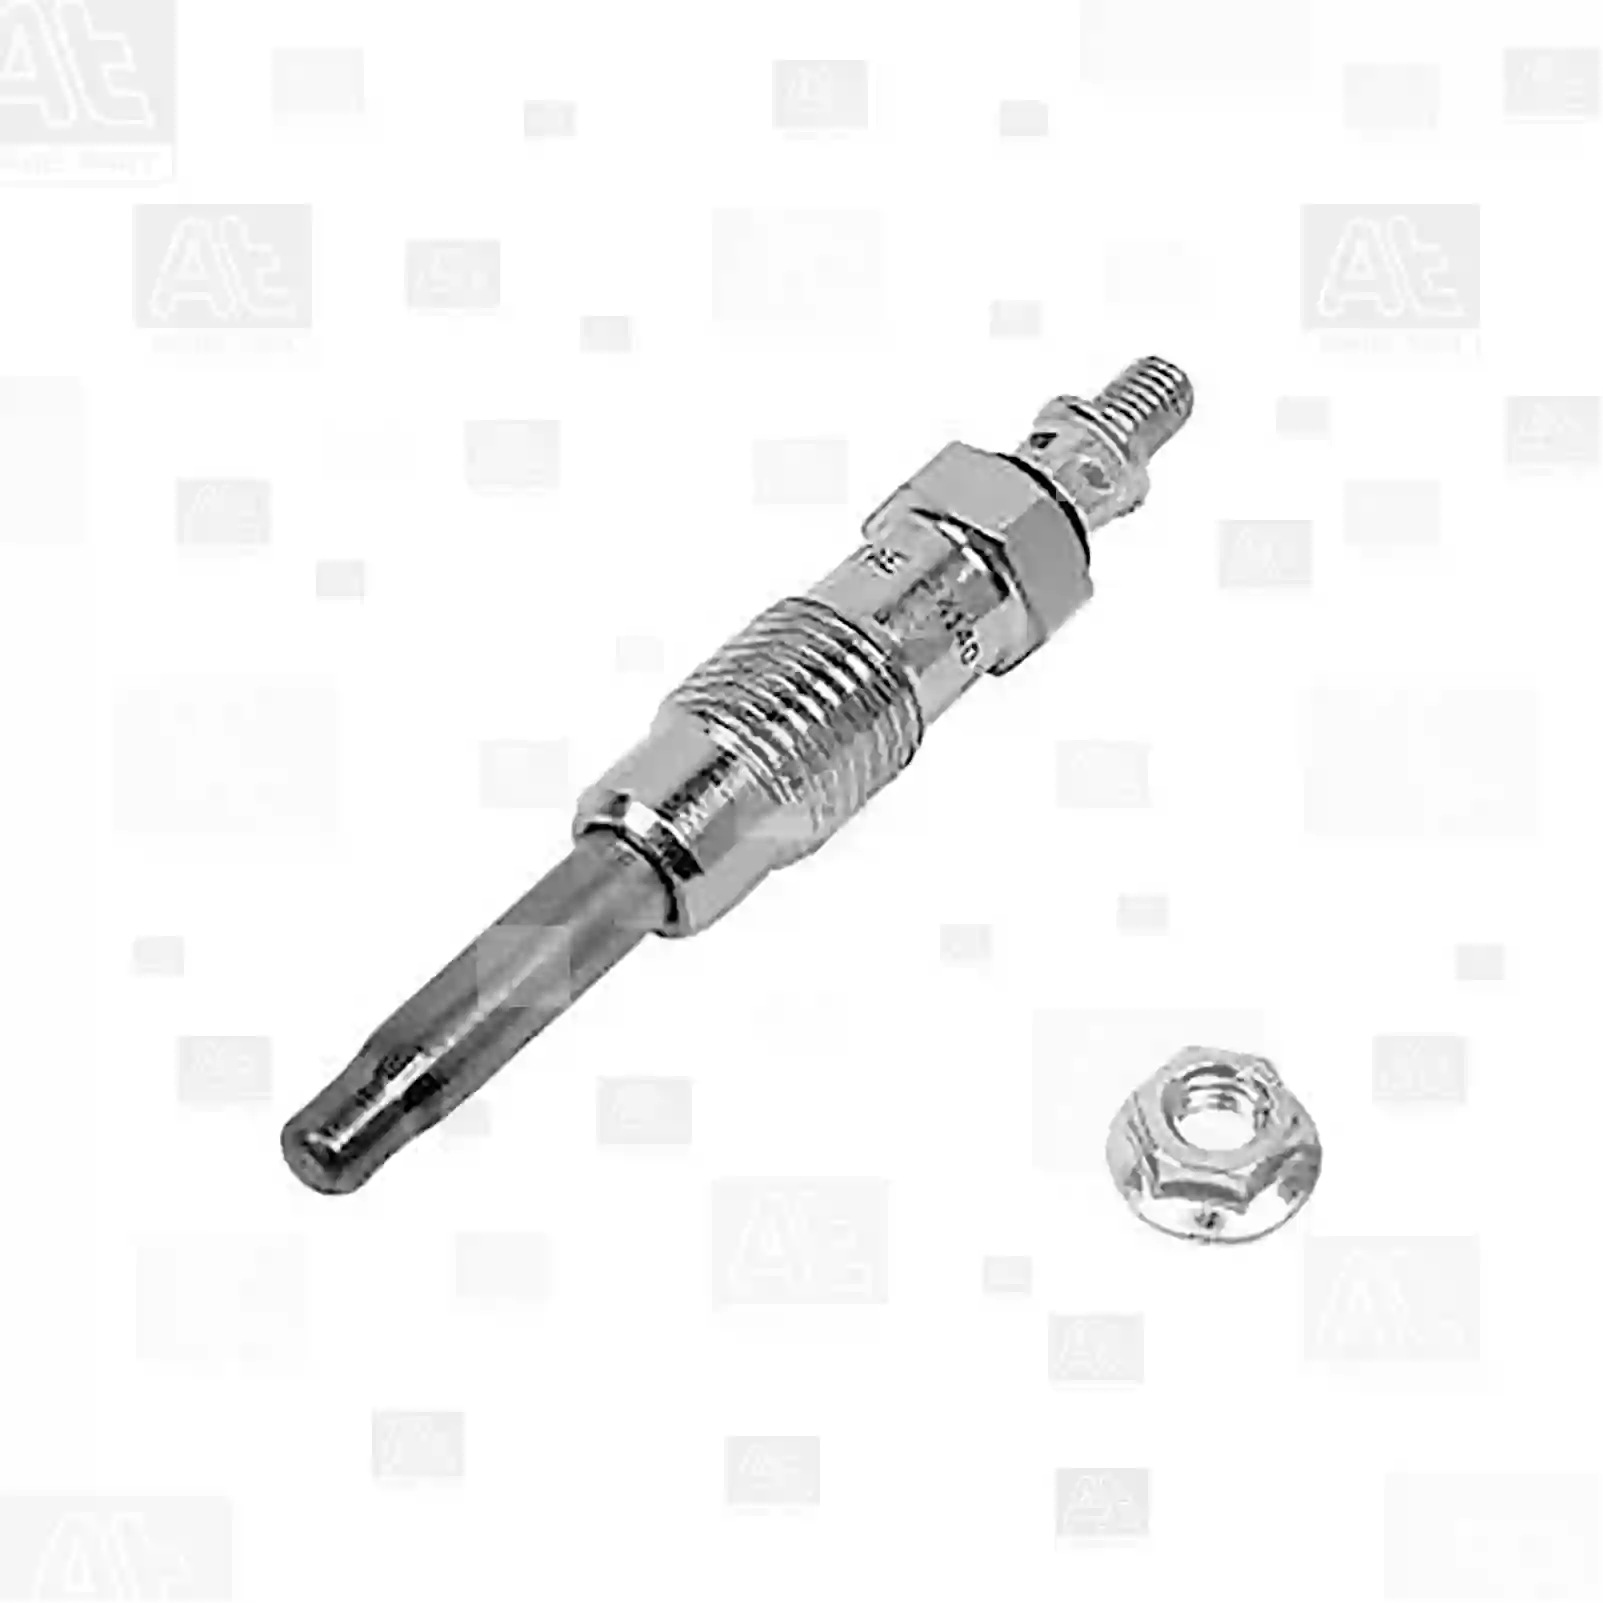 Engine Glow plug, at no: 77700226 ,  oem no:04474413, 04714294, 04729585, 04738576, 04752281, 04754011, 04774412, 04774413, 04781356, 04849406, 04849466, 05951881, 07634328, 60507123, 60596245, 60812292, 71735461, 77359200, 9616572480, 9633214380, 88900728, 12121288245, 12231286058, 12232240255, 12239061353, 596139, 596140, 596153, 596154, 596157, 596158, 596203, 59620Y, 59621X, 59621Z, 59623H, 59623J, 596274, 5962G7, 5962J2, 5962J4, 5962J5, 5962J6, 5962J7, 5962K5, 5962R8, 5962S8, 5962T1, 5962T2, 5962T3, 5962W8, 5962X1, 7932564528, 7932567717, 7932567718, 9150771880, 9150861080, 9152184980, 9153664680, 9549320680, 9553478880, 9607625880, 9610468980, 9616572480, 9614167880, 105977, 1353958, 192618, 04774413, 04781356, 04833643, 04849406, 05951879, 05951880, 05951881, 07634328, 50032392, 60507123, 60800110, 71719015, 1608204, 1626445, 055124, 1103, B26SR, B48R, 1214055, 1214303, 1214304, 1214305, 1214306, 1214307, 1214317, 1214318, 1214319, 1214324, 1214702, 88900723, 88900739, 88900740, 88900743, 90033357, 90051950, 90093867, 90093897, 90166155, 90210824, 90509368, 90510924, 90540864, 93197243, 93893040, 93893043, 93893047, 93893051, 93893052, 93893057, 94221719, 94241449, 94319700, 94422171, 94439218, 95508495, 36710-29000, 36710-29001, 5-81410040-0, 5-81410055-2, 5-81410056-3, 5-81410058-3, 8-94144412-0, 8-94144412-1, 8-94221719-3, 8-94241449-0, 8-94241449-1, 8-94241499-0, 8-94249692-1, 8-94255588-0, 8-94319700-1, 8-94319700-2, 8-94439218-0, 9-82511957-0, 9-82511964-0, 9-82511978-0, 9-82511978-1, 9-82511978-2, 9-82511978-3, 02997077, 04774413, 04781356, 04783047, 04841294, 04849406, 05951879, 4774413, 4781356, 4783047, 4841294, 4849406, 5951879, 98462490, 212153740010, 04833643, 04849406, 04896406, 05951881, 05951882, 05973752, 07634328, 60507123, 60596245, 60800110, 71719015, 71735461, 9616572480, 9633214380, 96165724, ERC8450, STC2222, STC2223, 596158, 1072100089, 6254414, 0001597701, 0001598101, 0001598301, 0011592201, 0011593501, 0011597501, 11065-Y9703, 1214055, 1214308, 1214311, 1214312, 1214318, 5614221, K666AF01, 596139, 596140, 596153, 596154, 596157, 596158, 596203, 59620Y, 59621X, 59621Z, 59623H, 59623J, 596274, 5962G7, 5962J2, 5962J4, 5962J5, 5962J6, 5962J7, 5962K5, 5962R8, 5962S8, 5962T1, 5962T2, 5962T3, 5962W8, 5962X1, 7932564528, 7932567717, 7932567718, 9150771880, 9150861080, 9152184980, 9153664680, 9549320680, 9553478880, 9607625880, 9610468980, 9616572480, 438036, 5001001587, 7700662199, 7700673874, 7700701130, 7700704185, 7700715768, 7700733076, 7700741144, 7700854538, 7700855865, 7700856238, 7700856292, 7700867617, 7701029762, 7701031105, 7701039387, 7701349475, 7701349943, 7701349949, 7701414077, 7701414086, 7701414088, 7701414162, 8671004016, ADU9830, NCC10001, STC2222, STC2223, STC3103, 2883001030, 3001661159, 15320-86CA0, 1257141, 1257889, 3287815, 0003940685, 021919000C, 061905061, 068905061, N0190811, N0190812, N0190814, N0190971, N01910001, N0191001, N0191002, N0191005, N0191006, N10213001, N10213002 At Spare Part | Engine, Accelerator Pedal, Camshaft, Connecting Rod, Crankcase, Crankshaft, Cylinder Head, Engine Suspension Mountings, Exhaust Manifold, Exhaust Gas Recirculation, Filter Kits, Flywheel Housing, General Overhaul Kits, Engine, Intake Manifold, Oil Cleaner, Oil Cooler, Oil Filter, Oil Pump, Oil Sump, Piston & Liner, Sensor & Switch, Timing Case, Turbocharger, Cooling System, Belt Tensioner, Coolant Filter, Coolant Pipe, Corrosion Prevention Agent, Drive, Expansion Tank, Fan, Intercooler, Monitors & Gauges, Radiator, Thermostat, V-Belt / Timing belt, Water Pump, Fuel System, Electronical Injector Unit, Feed Pump, Fuel Filter, cpl., Fuel Gauge Sender,  Fuel Line, Fuel Pump, Fuel Tank, Injection Line Kit, Injection Pump, Exhaust System, Clutch & Pedal, Gearbox, Propeller Shaft, Axles, Brake System, Hubs & Wheels, Suspension, Leaf Spring, Universal Parts / Accessories, Steering, Electrical System, Cabin